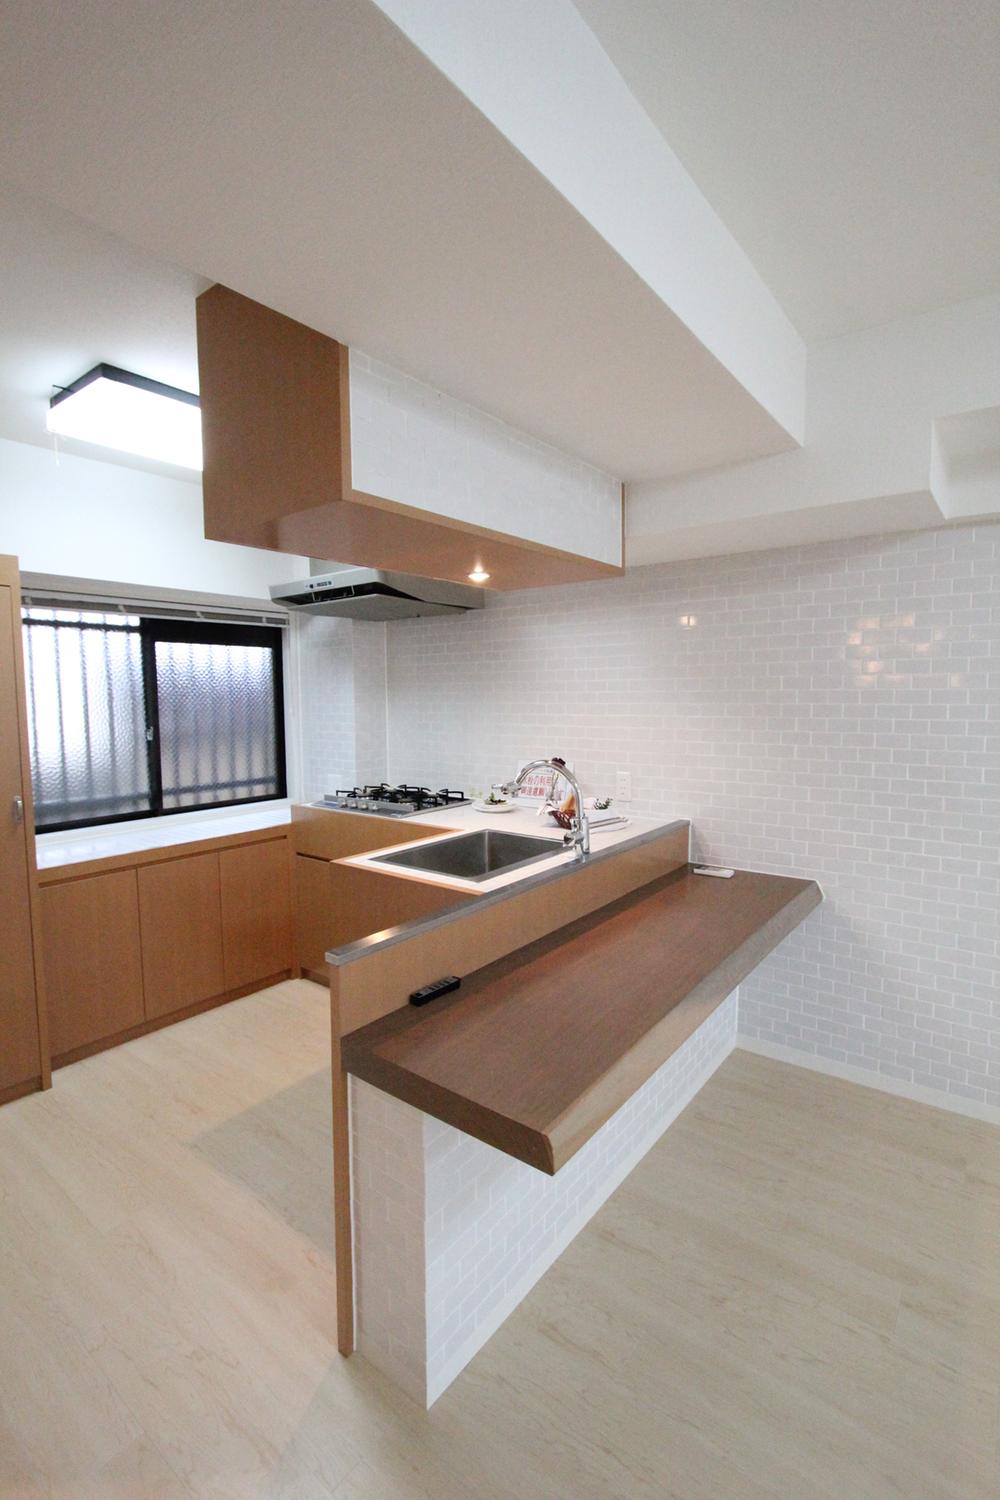 Kitchen. Wide and bright kitchen! Paste is fashionable tile